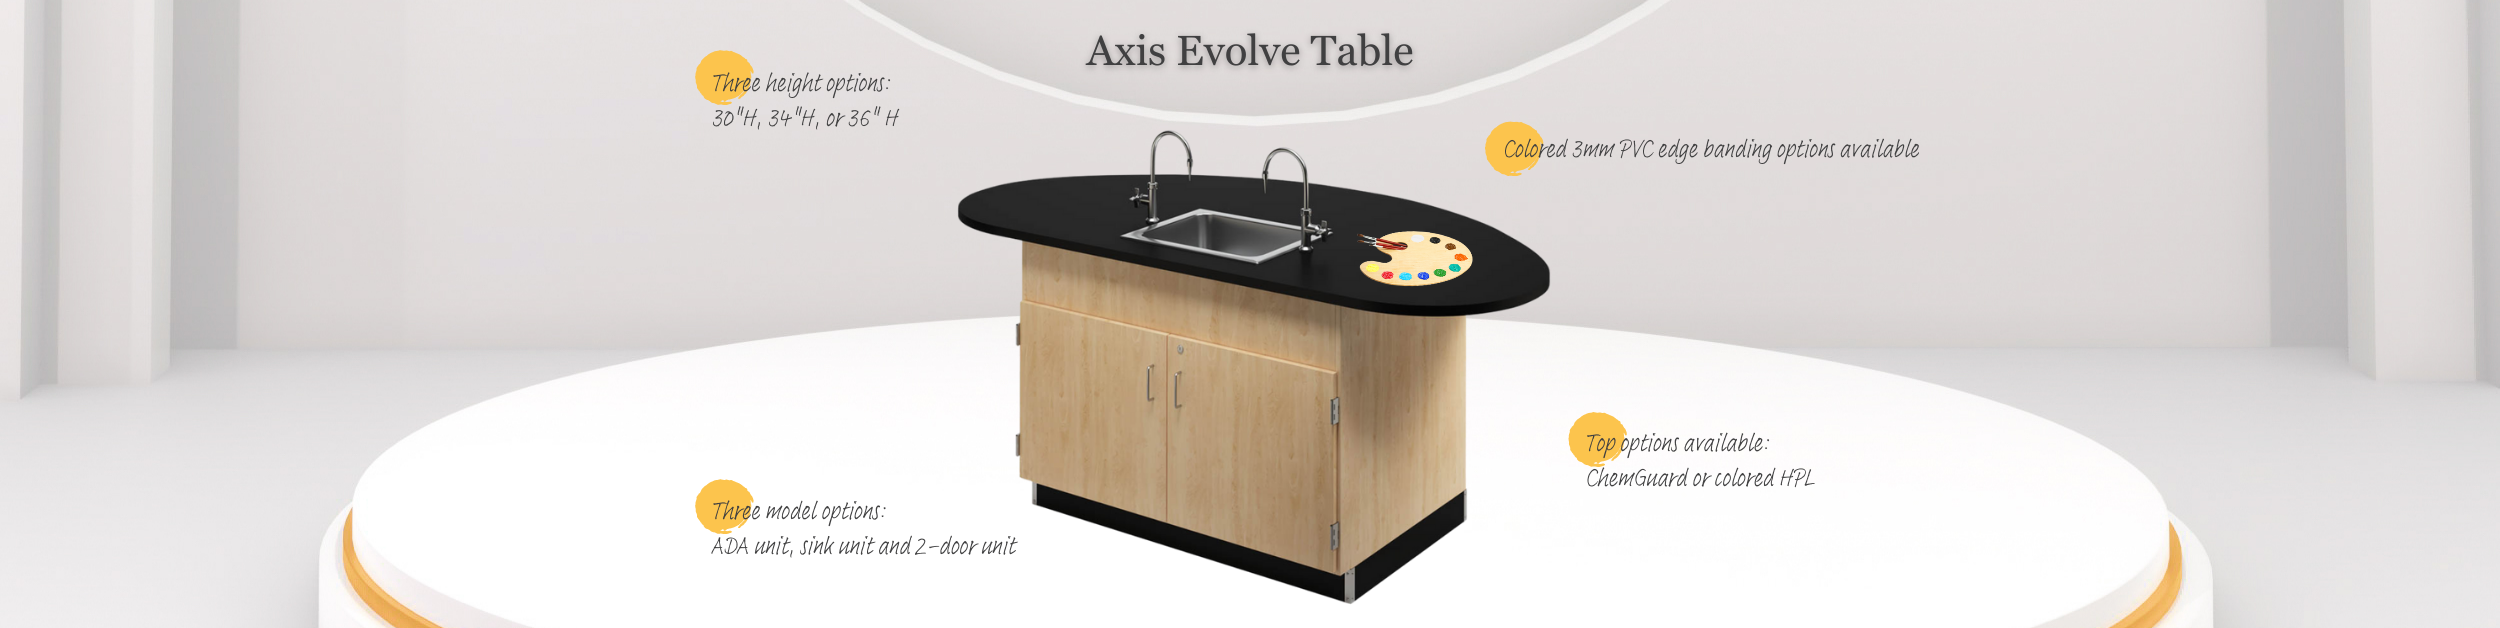 Axis_Evolve_Workstation_AE7_Full_Banner-2.png